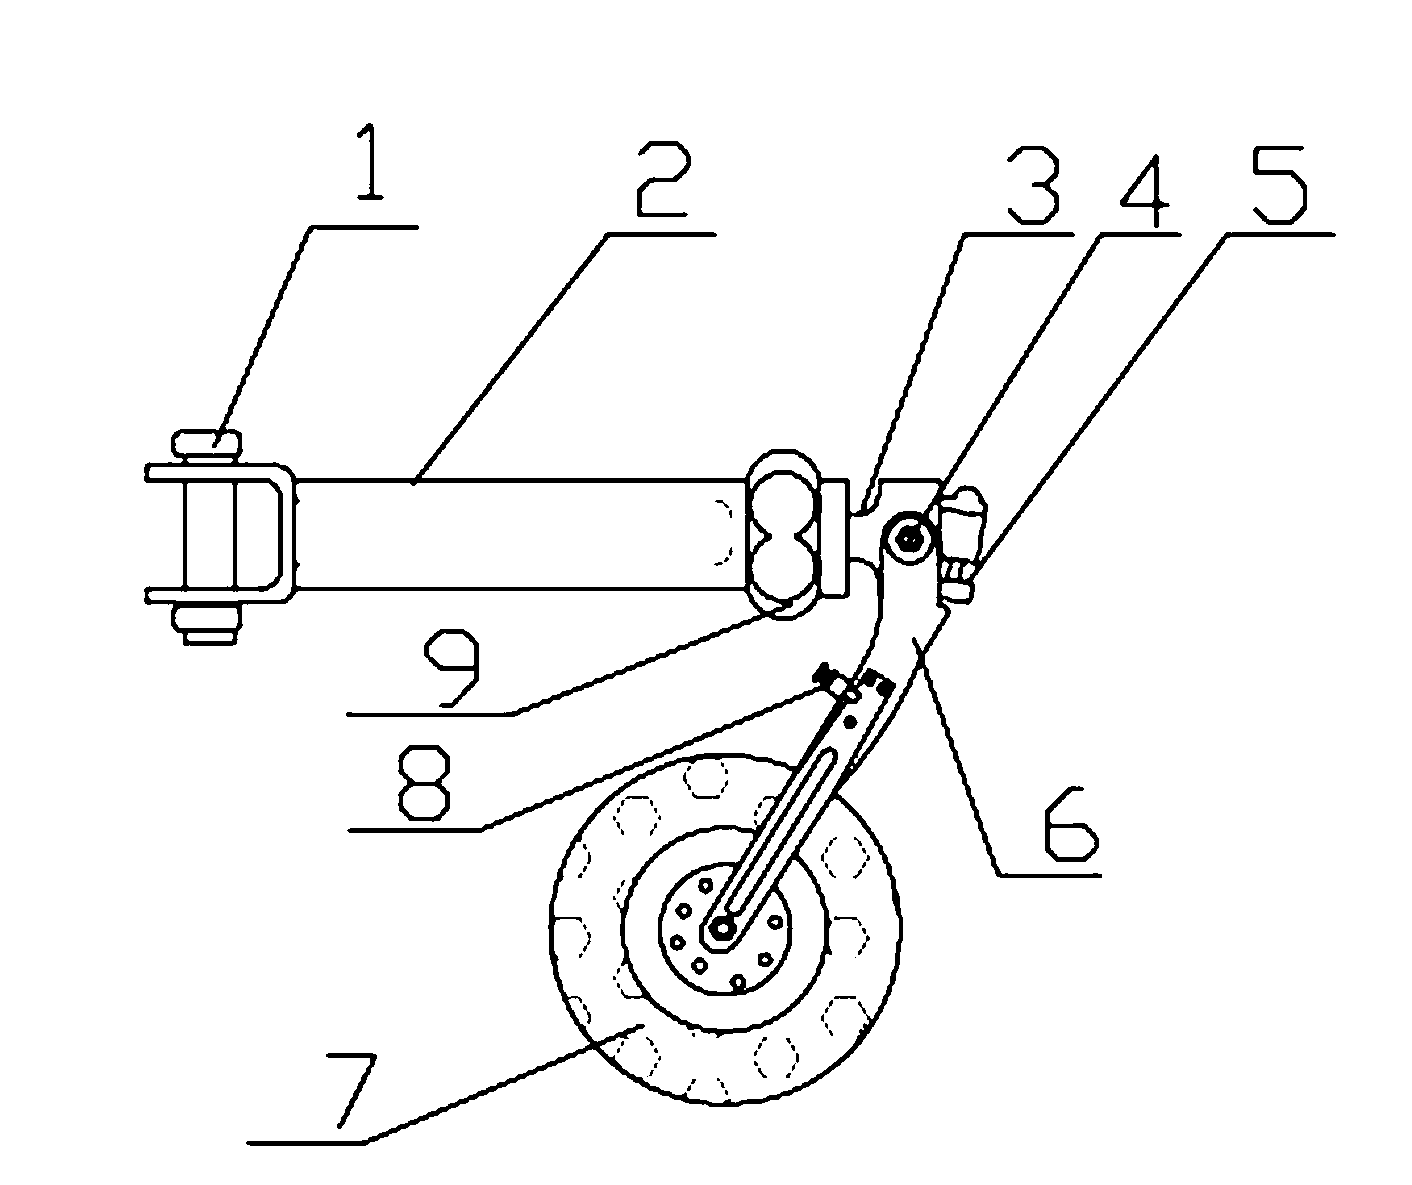 Automatic depth wheel of mounted turnover plow